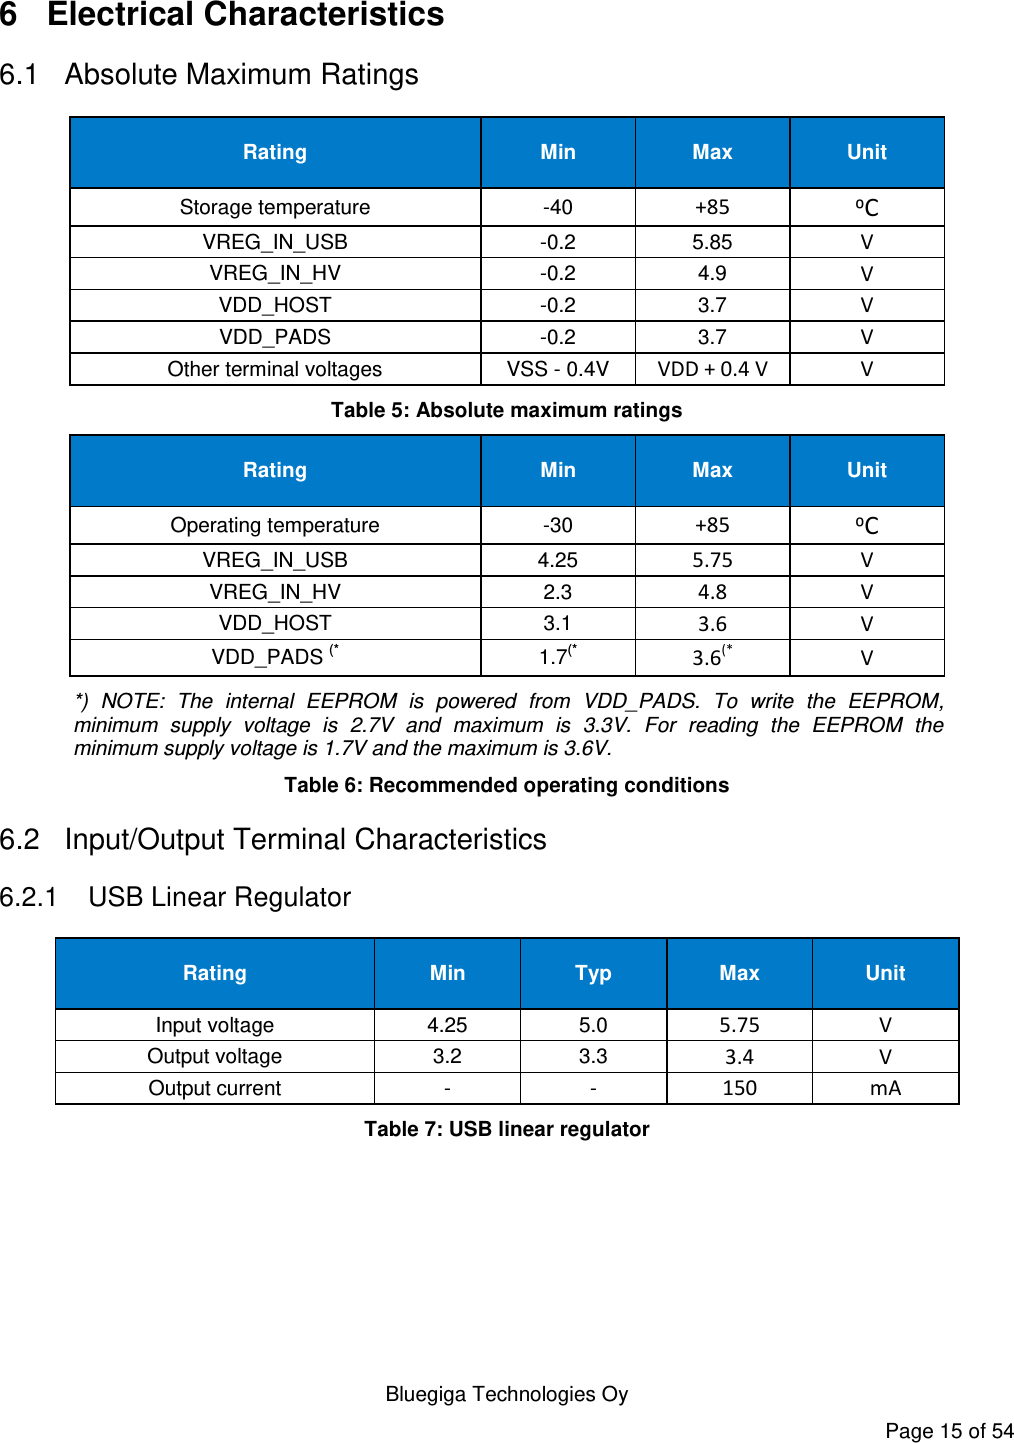    Bluegiga Technologies Oy Page 15 of 54 6  Electrical Characteristics 6.1  Absolute Maximum Ratings Rating Min Max Unit Storage temperature -40 +85 ⁰C VREG_IN_USB -0.2 5.85 V VREG_IN_HV -0.2 4.9 V VDD_HOST -0.2 3.7 V VDD_PADS -0.2 3.7 V Other terminal voltages VSS - 0.4V VDD + 0.4 V V Table 5: Absolute maximum ratings Rating Min Max Unit Operating temperature -30 +85 ⁰C VREG_IN_USB 4.25 5.75 V VREG_IN_HV 2.3 4.8 V VDD_HOST 3.1 3.6 V VDD_PADS (* 1.7(* 3.6(* V *)  NOTE:  The  internal  EEPROM  is  powered  from  VDD_PADS.  To  write  the  EEPROM, minimum  supply  voltage  is  2.7V  and  maximum  is  3.3V.  For  reading  the  EEPROM  the minimum supply voltage is 1.7V and the maximum is 3.6V.  Table 6: Recommended operating conditions 6.2  Input/Output Terminal Characteristics 6.2.1  USB Linear Regulator Rating Min Typ Max Unit Input voltage 4.25 5.0 5.75 V Output voltage 3.2 3.3 3.4 V Output current - - 150 mA Table 7: USB linear regulator  